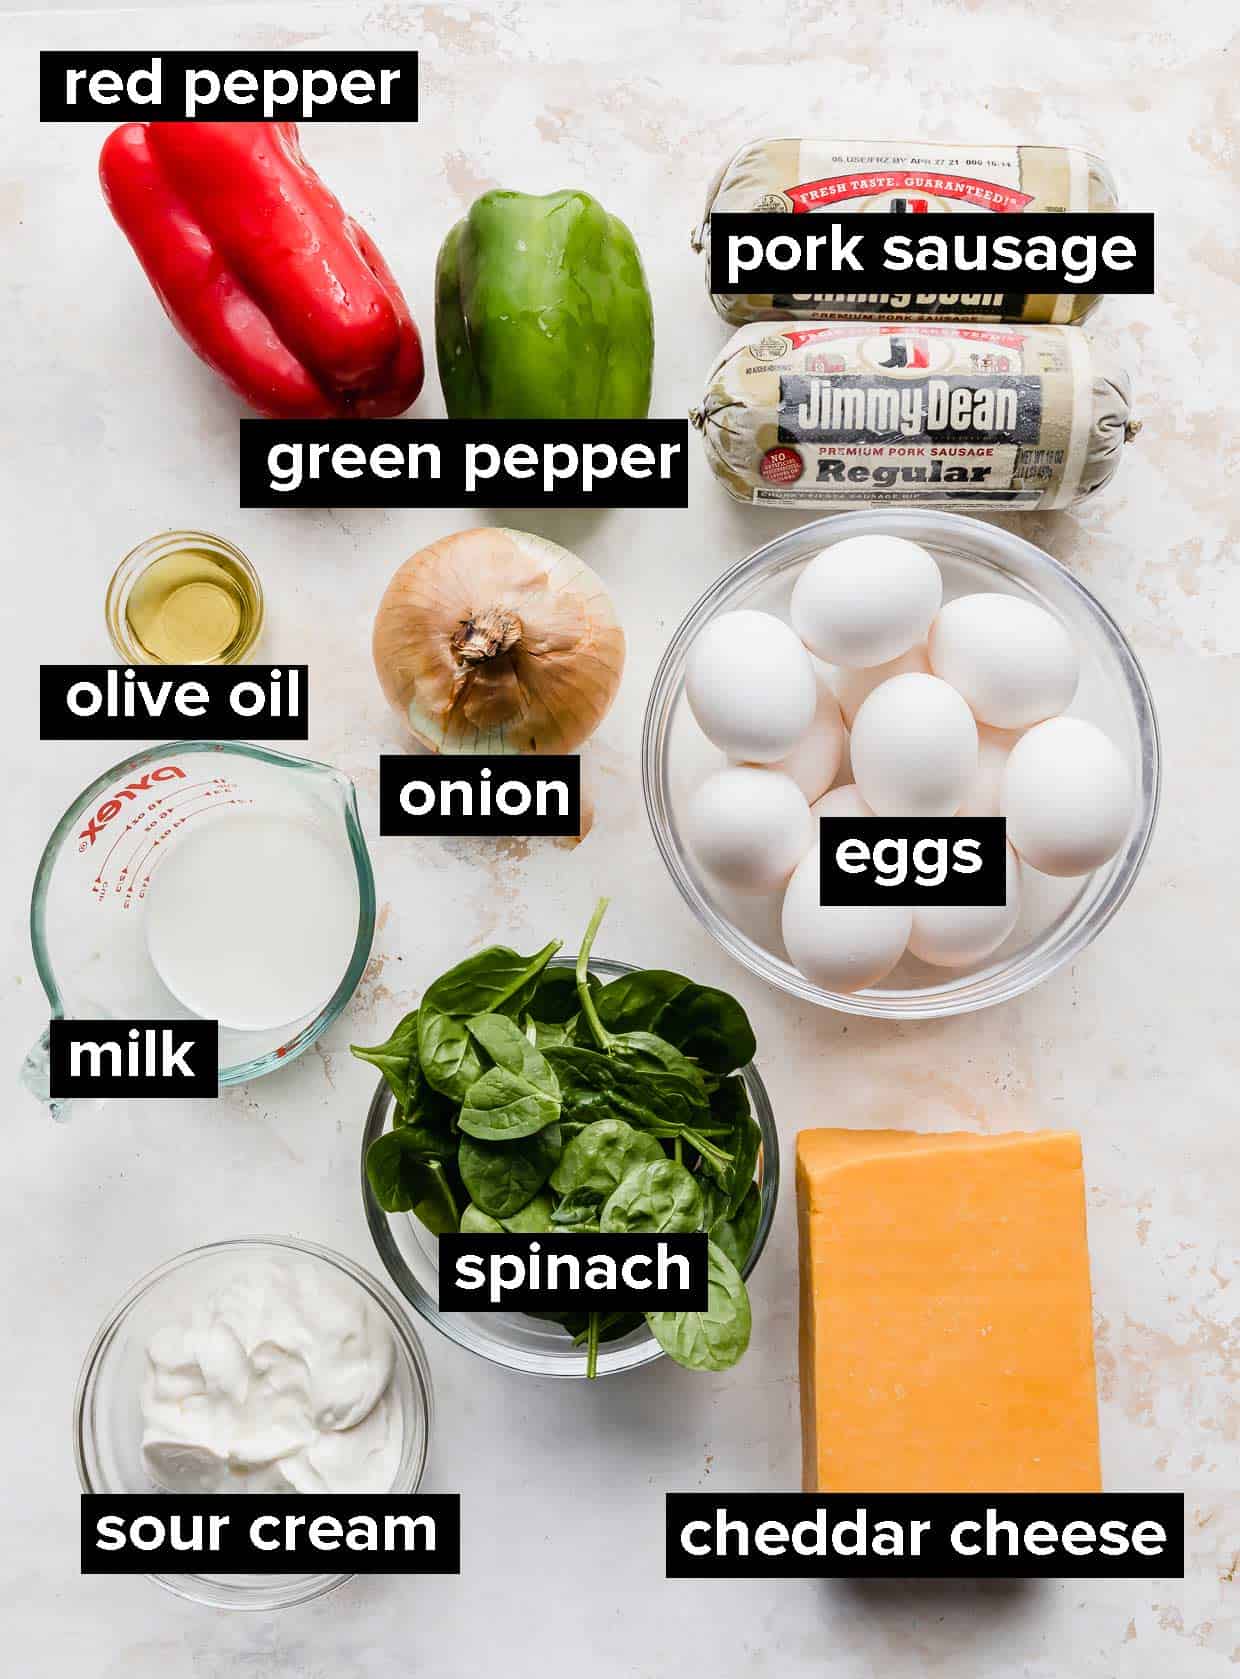 Ingredients used to make breakfast casserole on a textured white background.